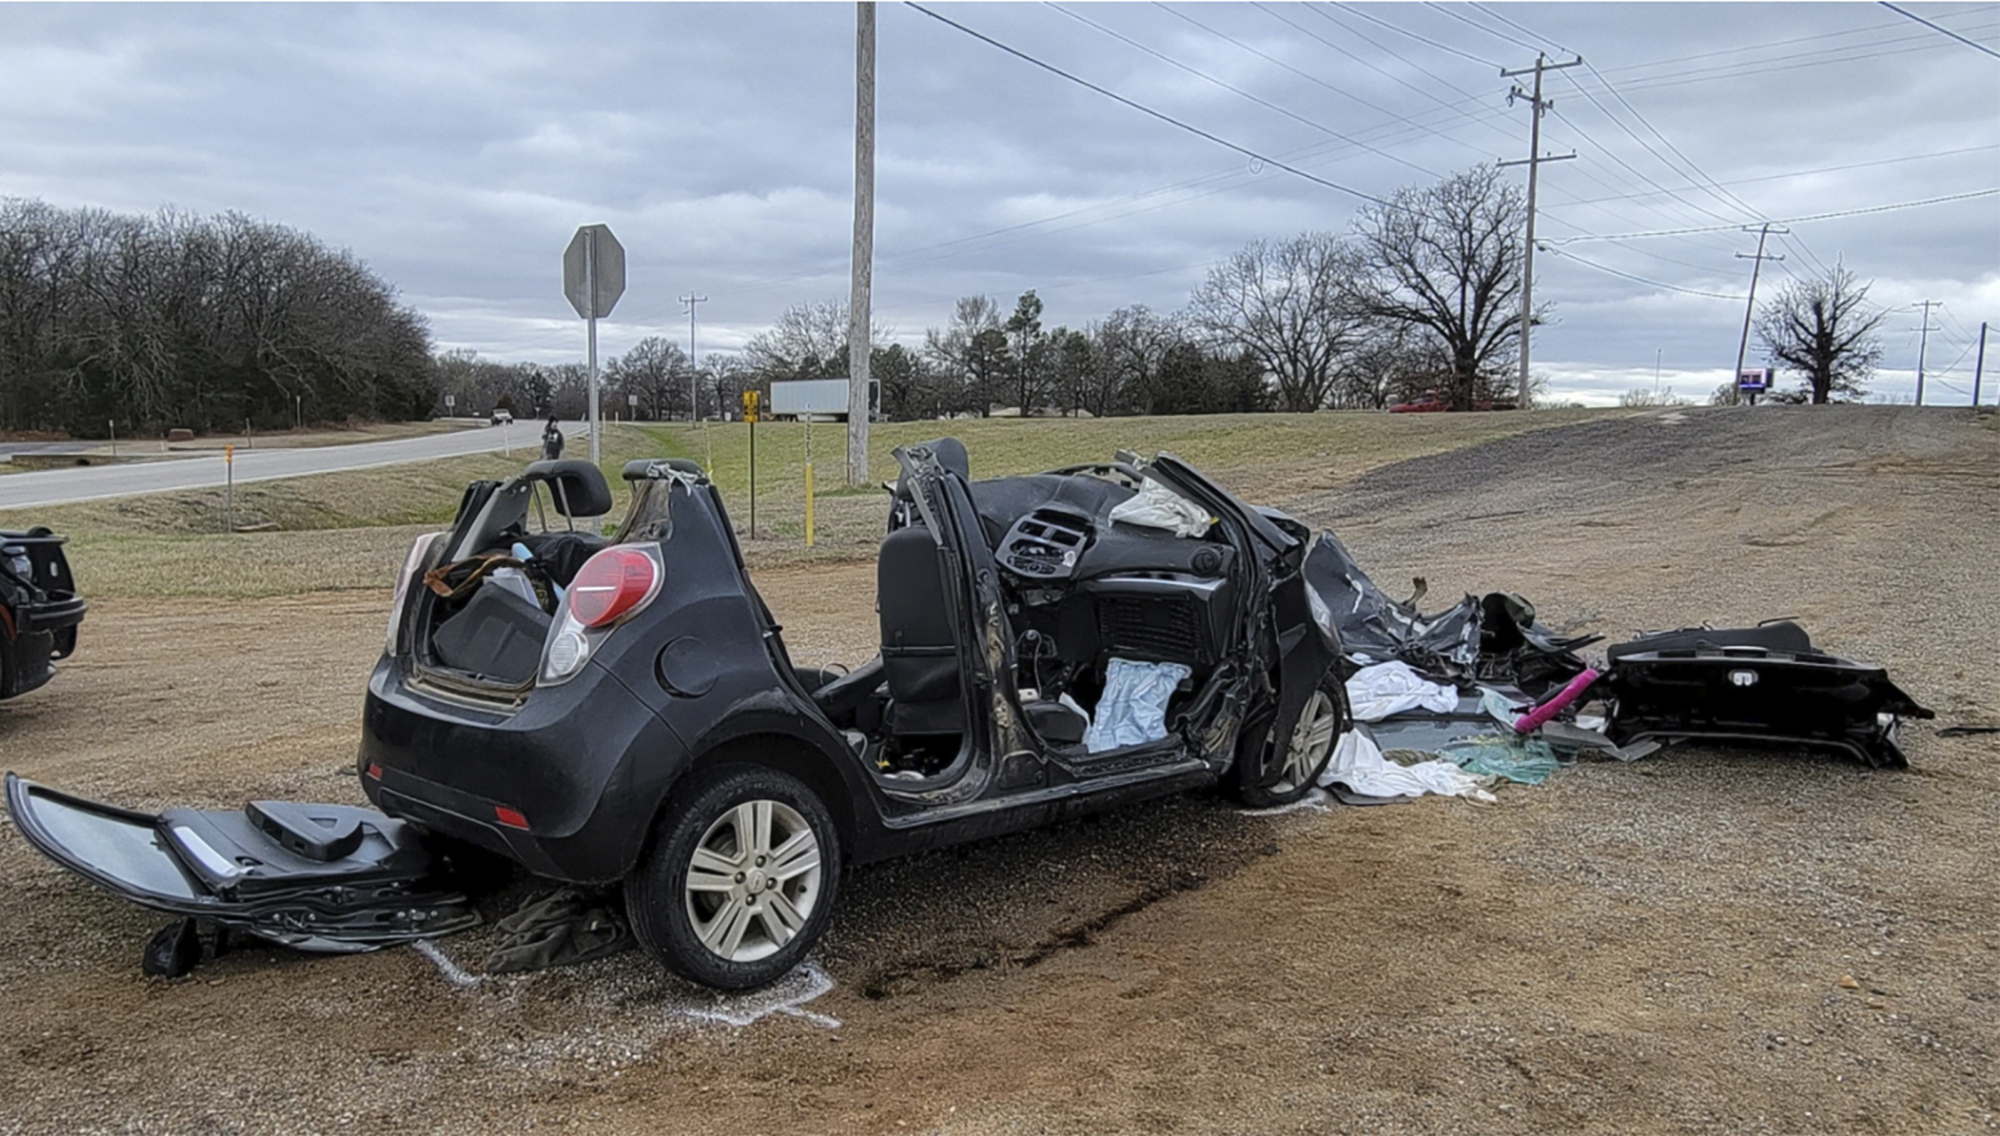 FILE - In this image provided by KFOR-TV, a heavily damaged vehicle is seen off a road in Tishoming...